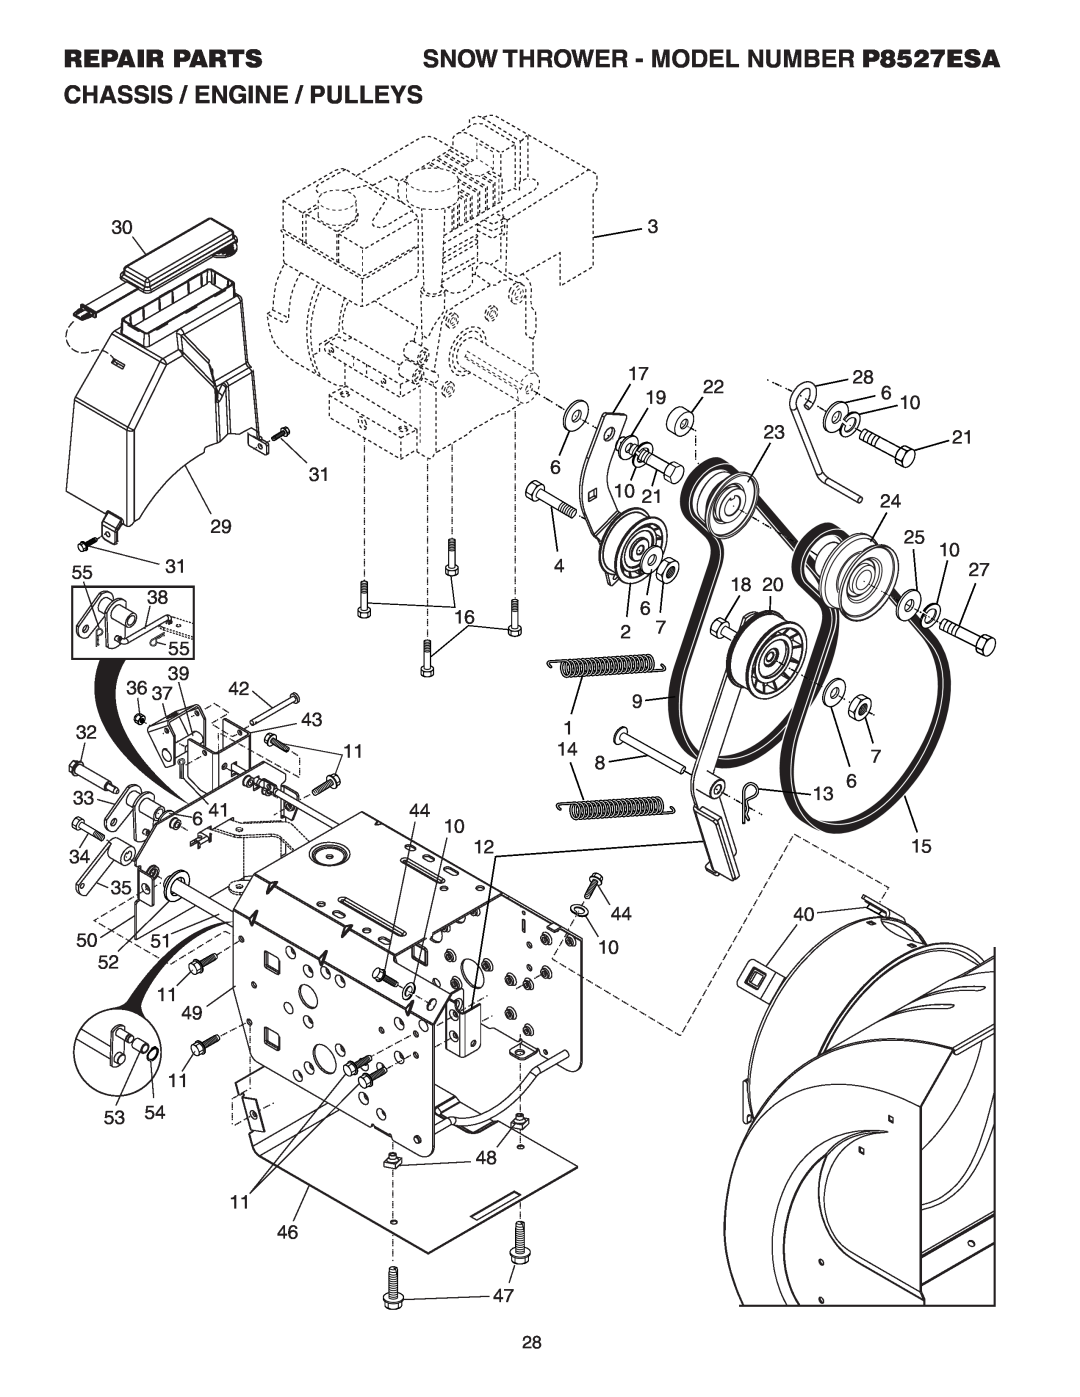 Poulan owner manual Chassis / Engine / Pulleys, Repair Parts, SNOW THROWER - MODEL NUMBER P8527ESA 